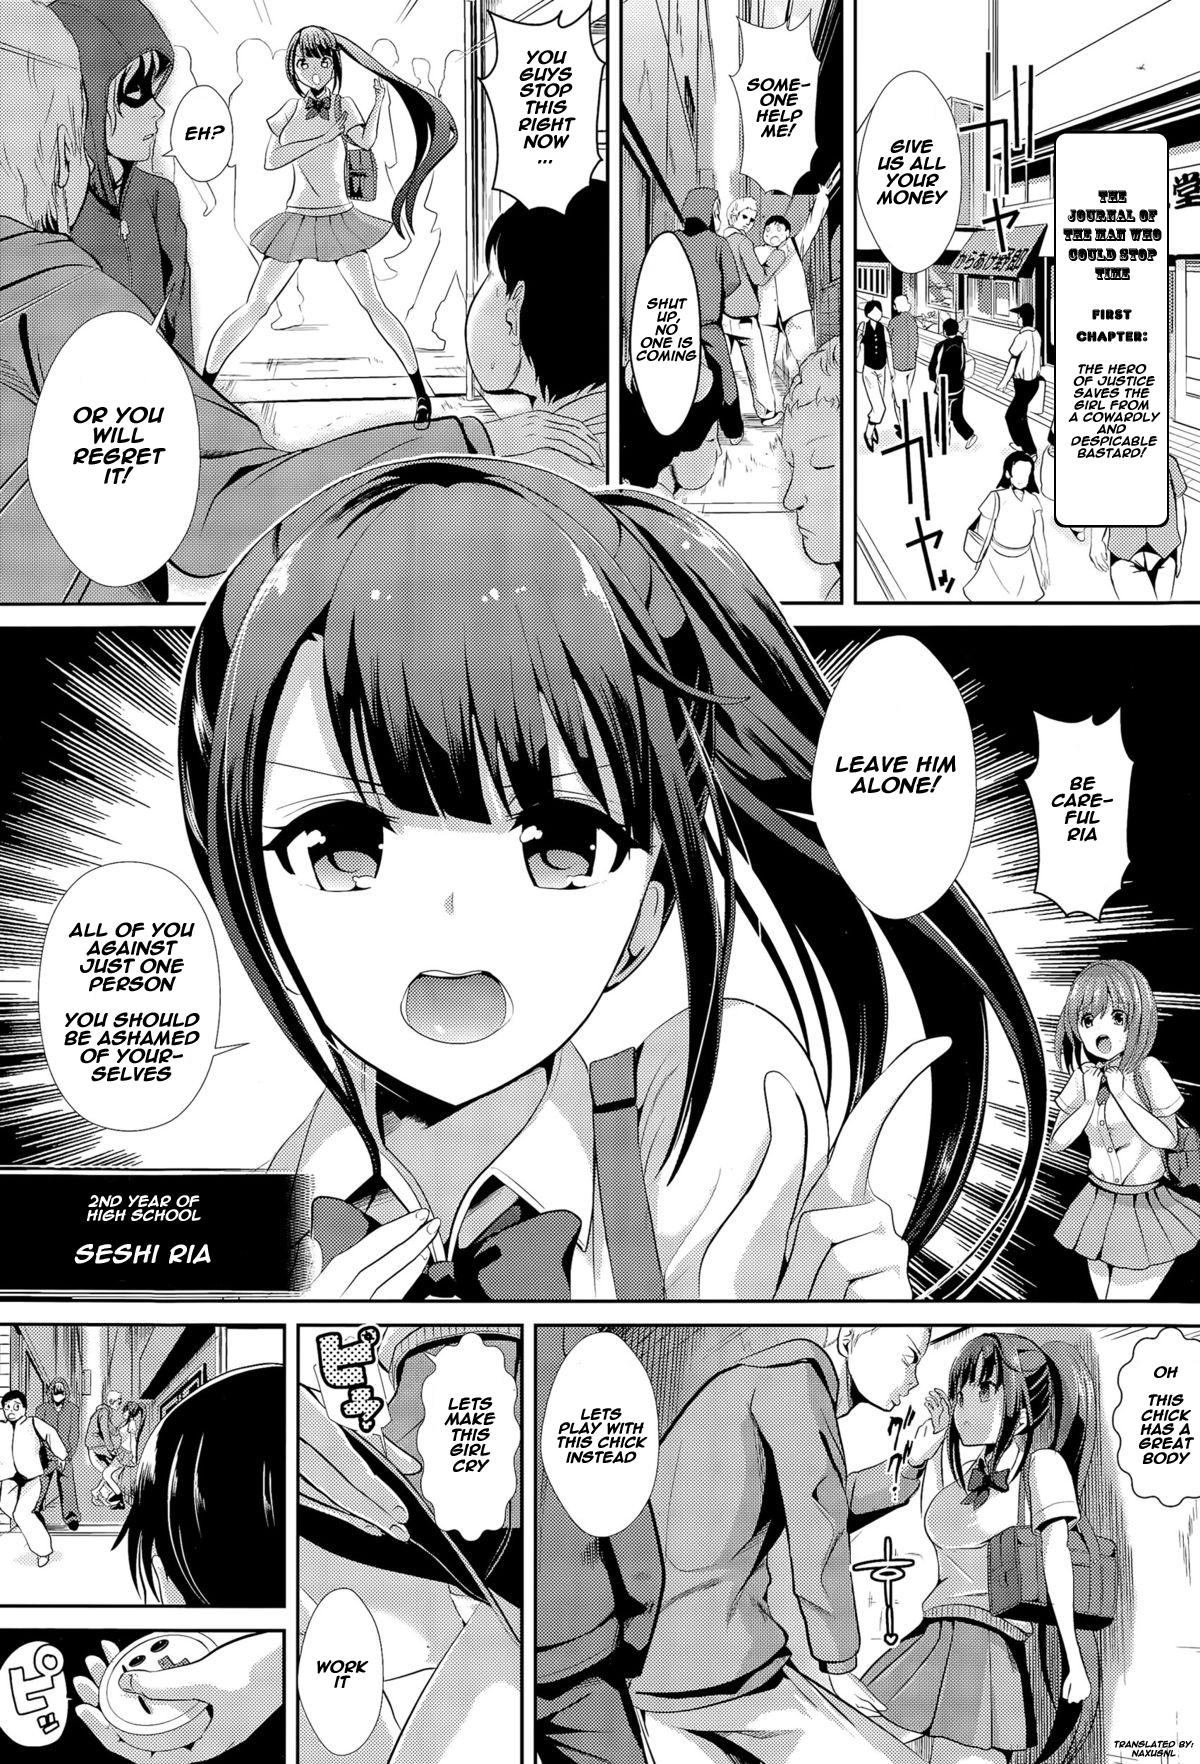 Lolicon Jikan Teishi no Otoko | The journal of the man who could stop time Ametuer Porn - Page 1